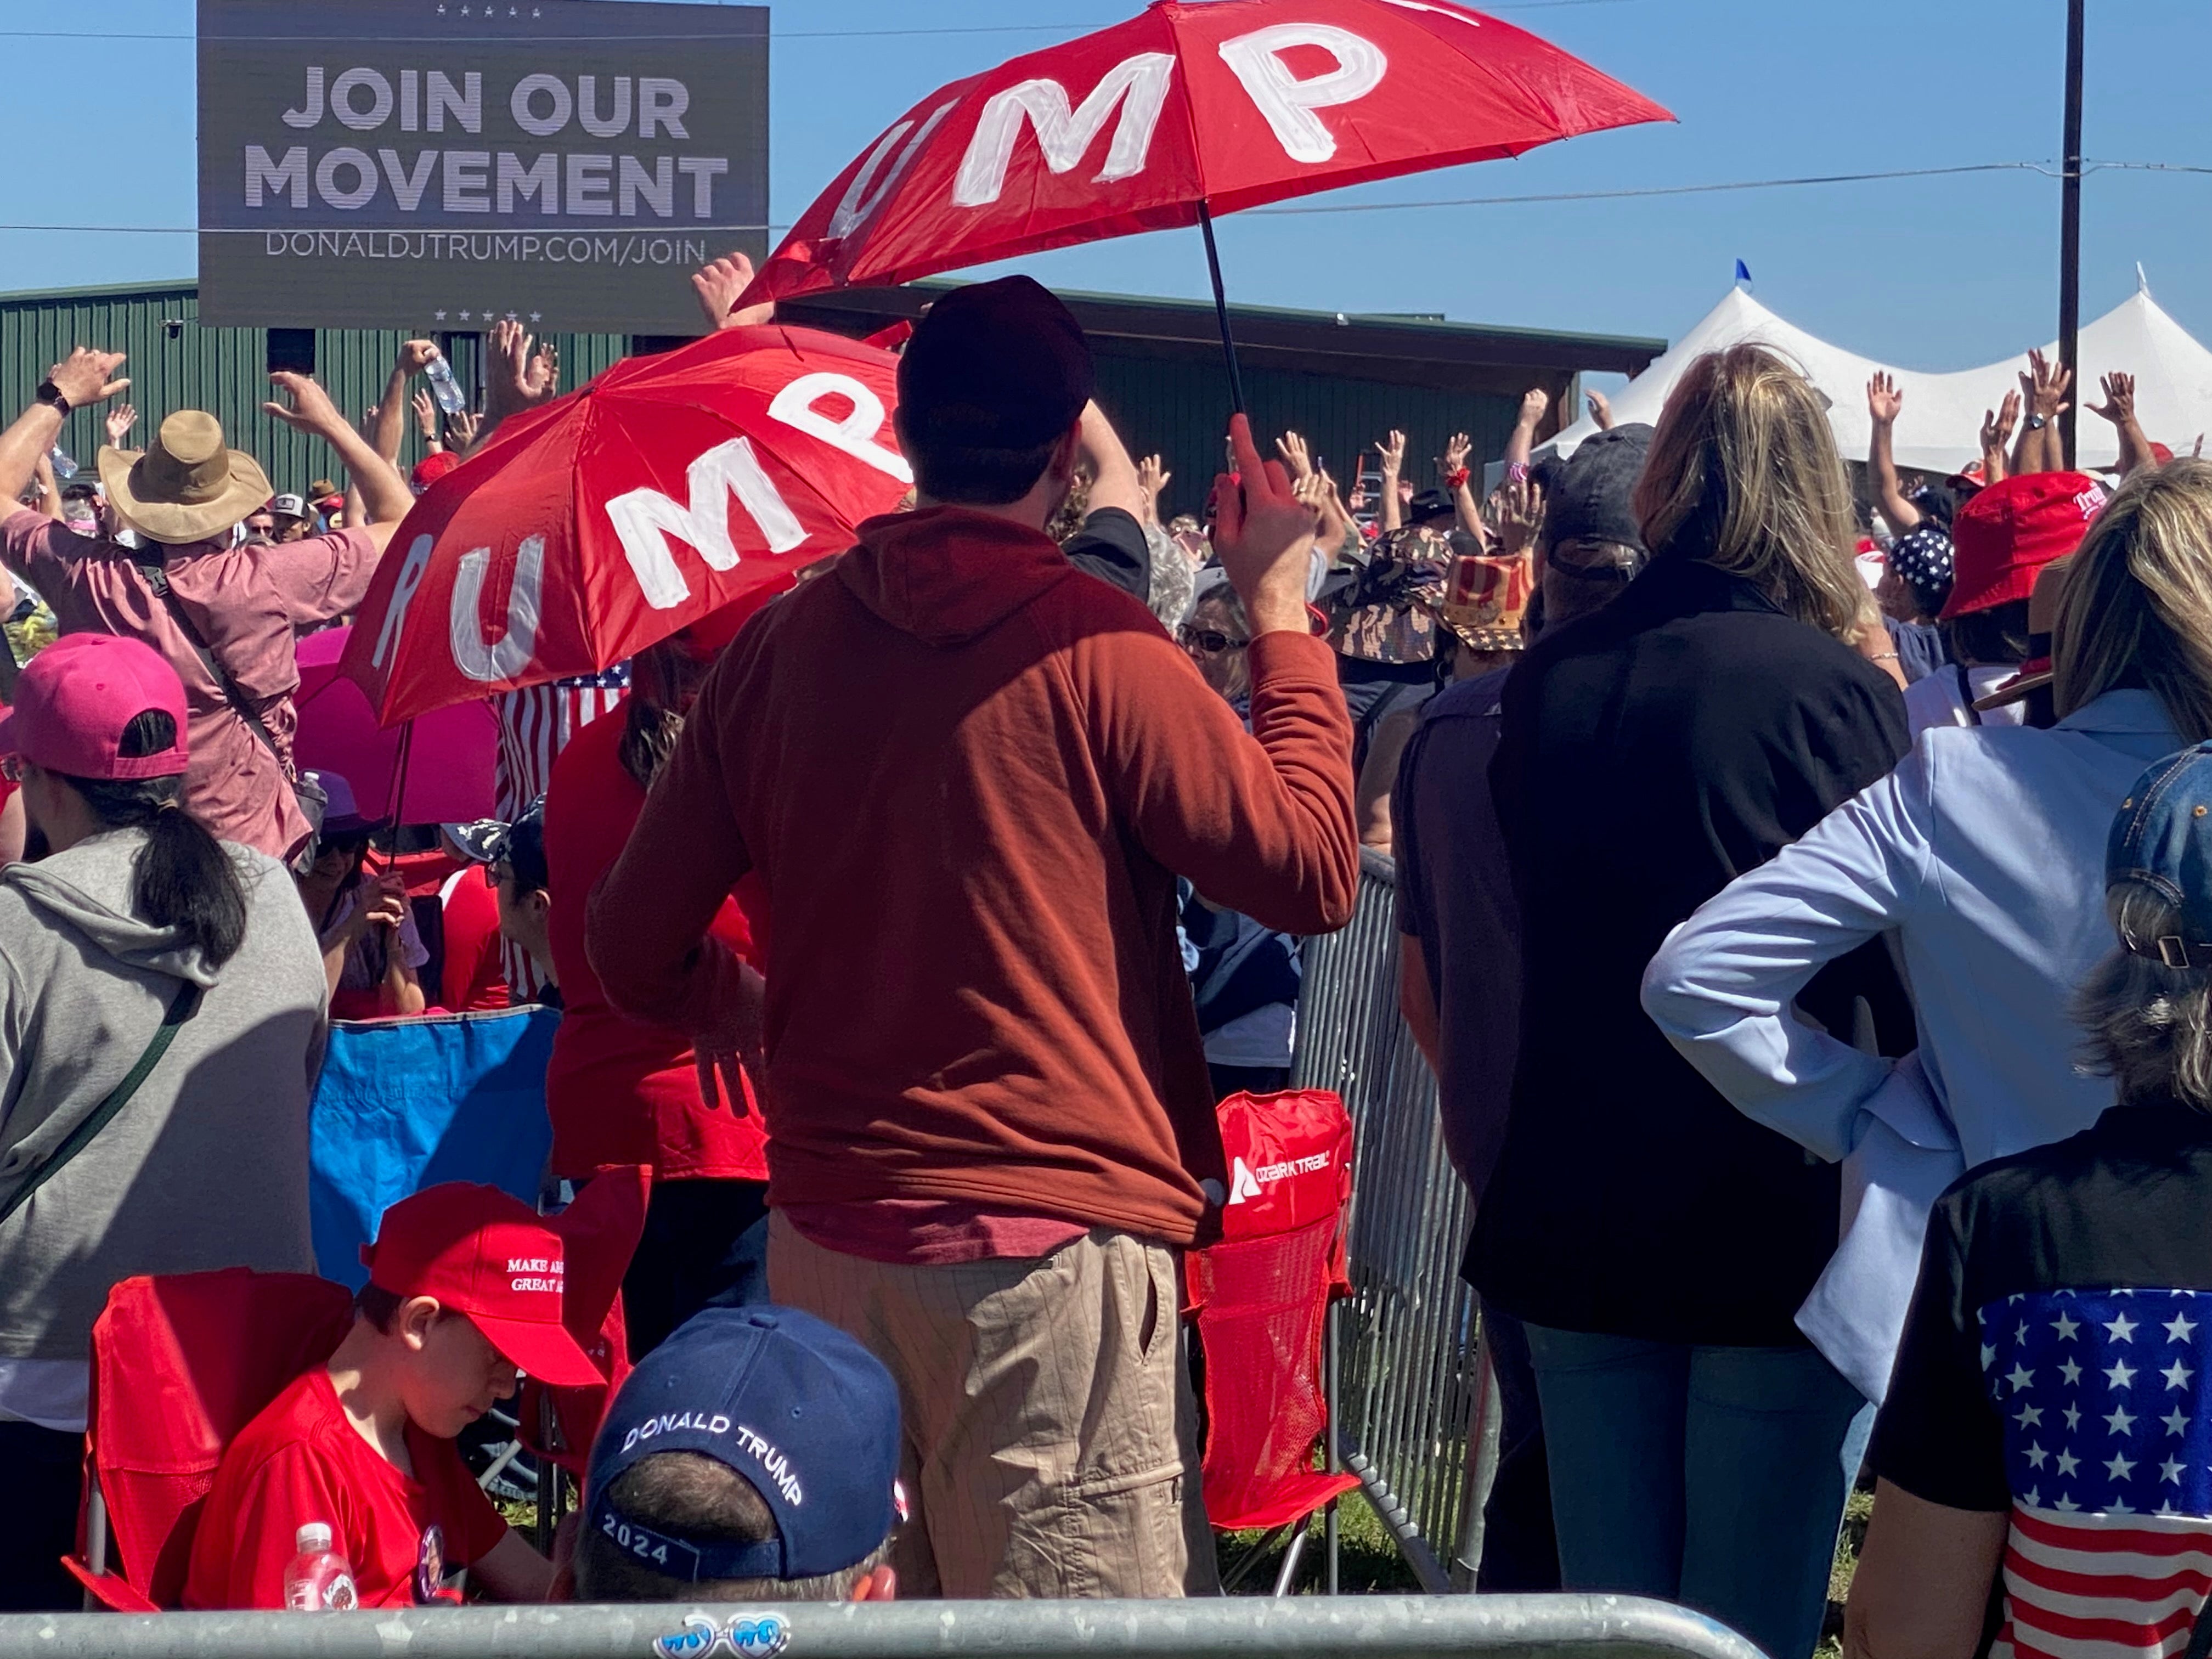 Trump supporters have started to arrive at the rally site in Waco, Texas